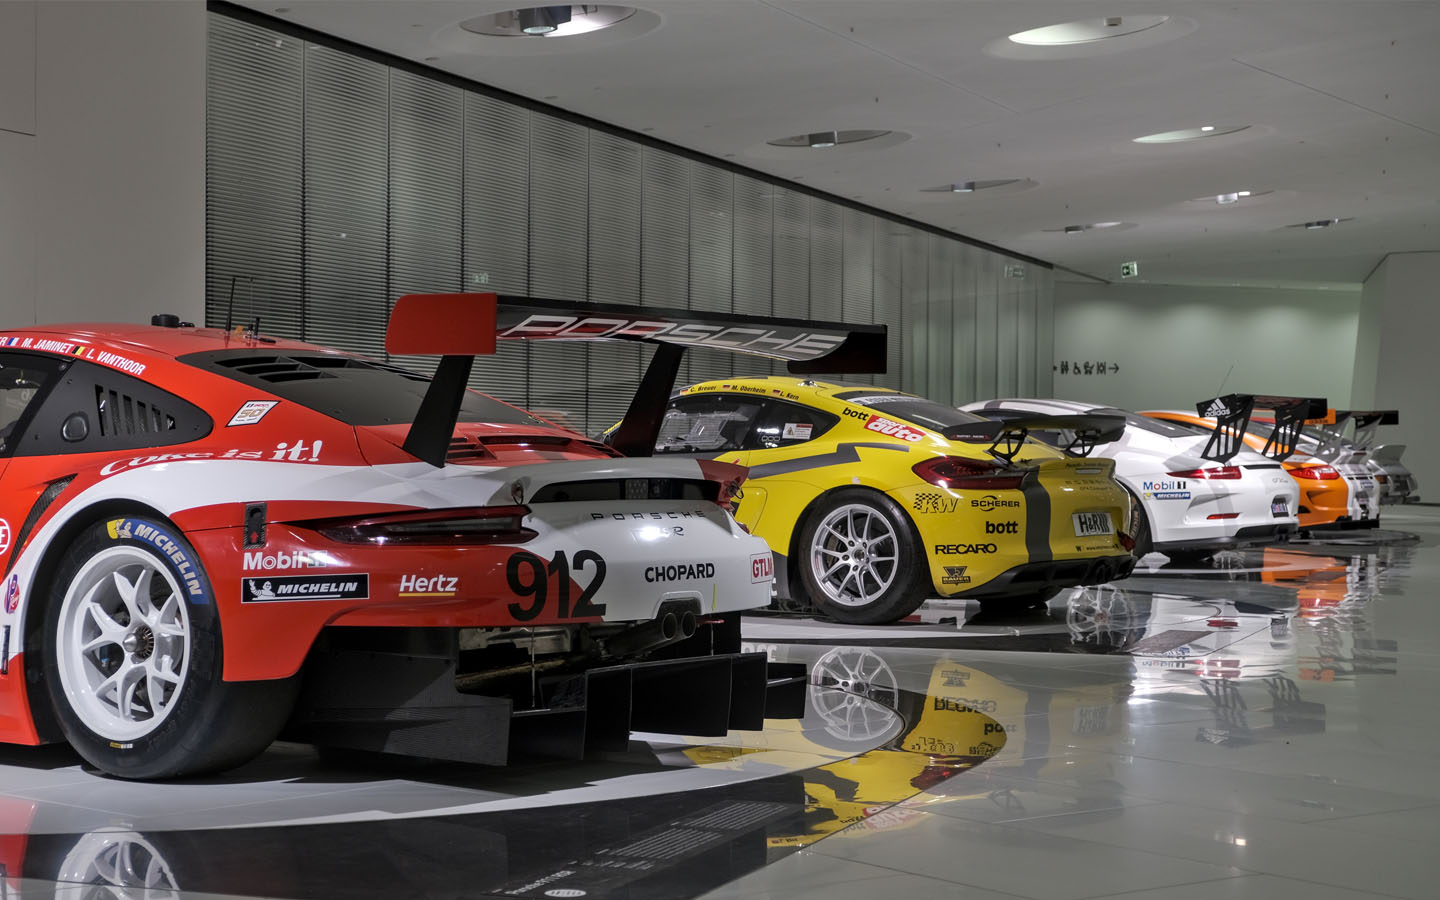 porsche's famous models will be on display during the event